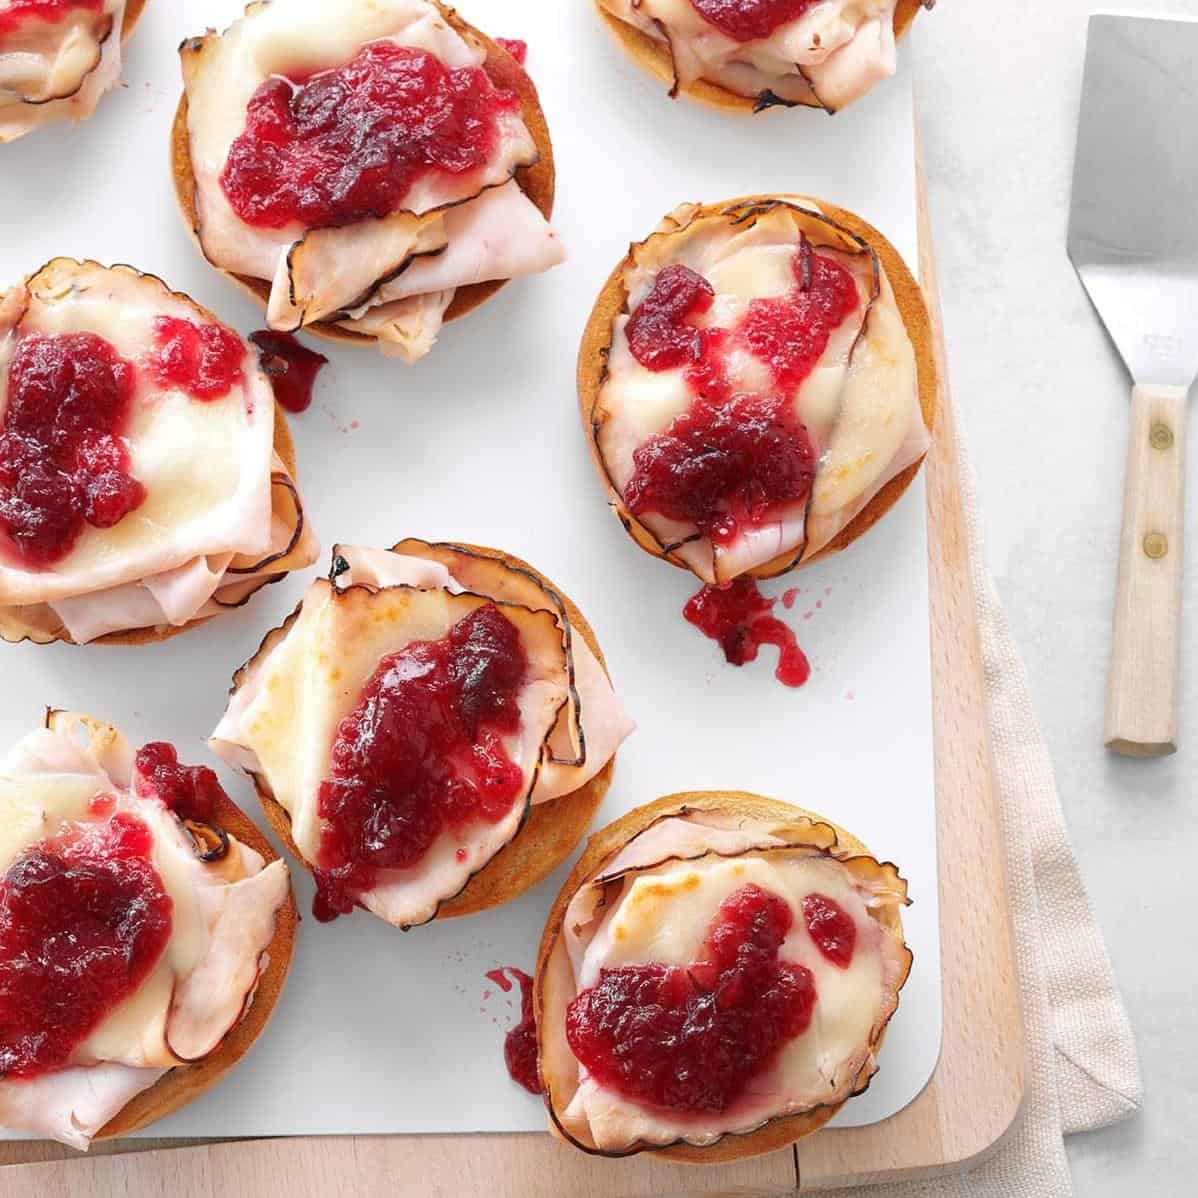  One juicy bite of cranberry turkey bagel and your taste buds will be begging for another.